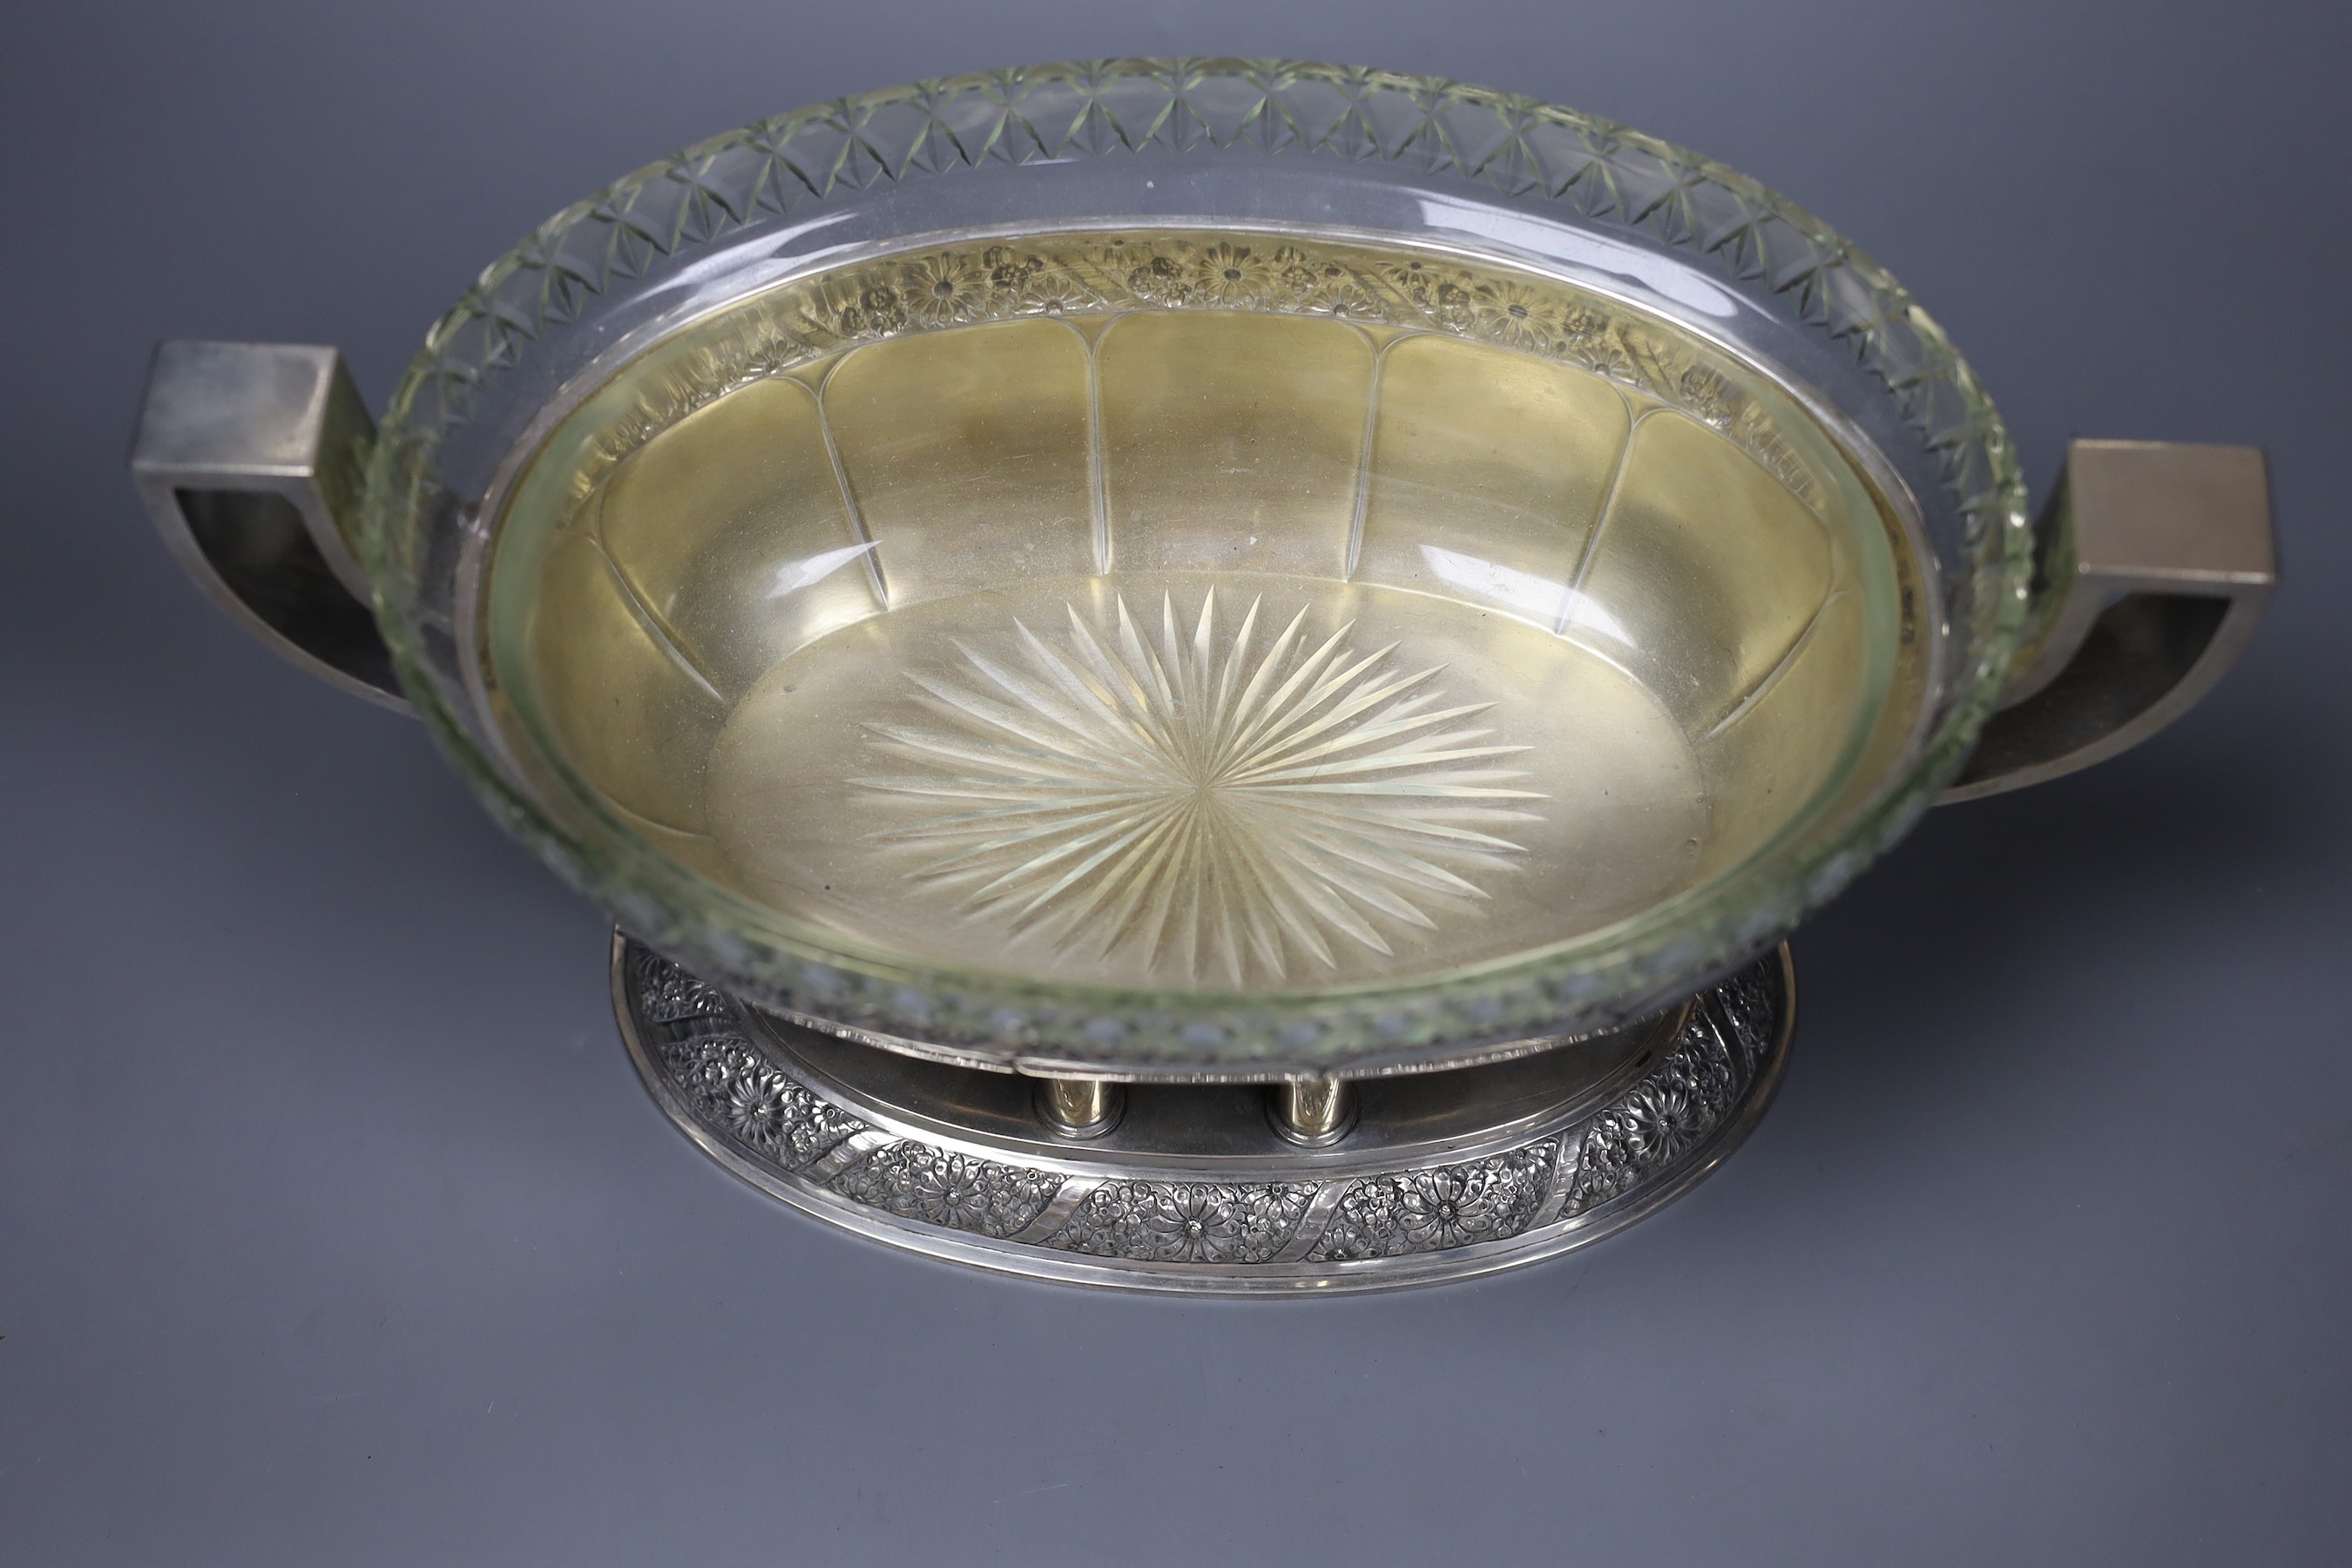 An early 20th century Continental white metal two handled centrepiece bowl, with engraved floral banded decoration and cut glass liner, 35cm over the handles.